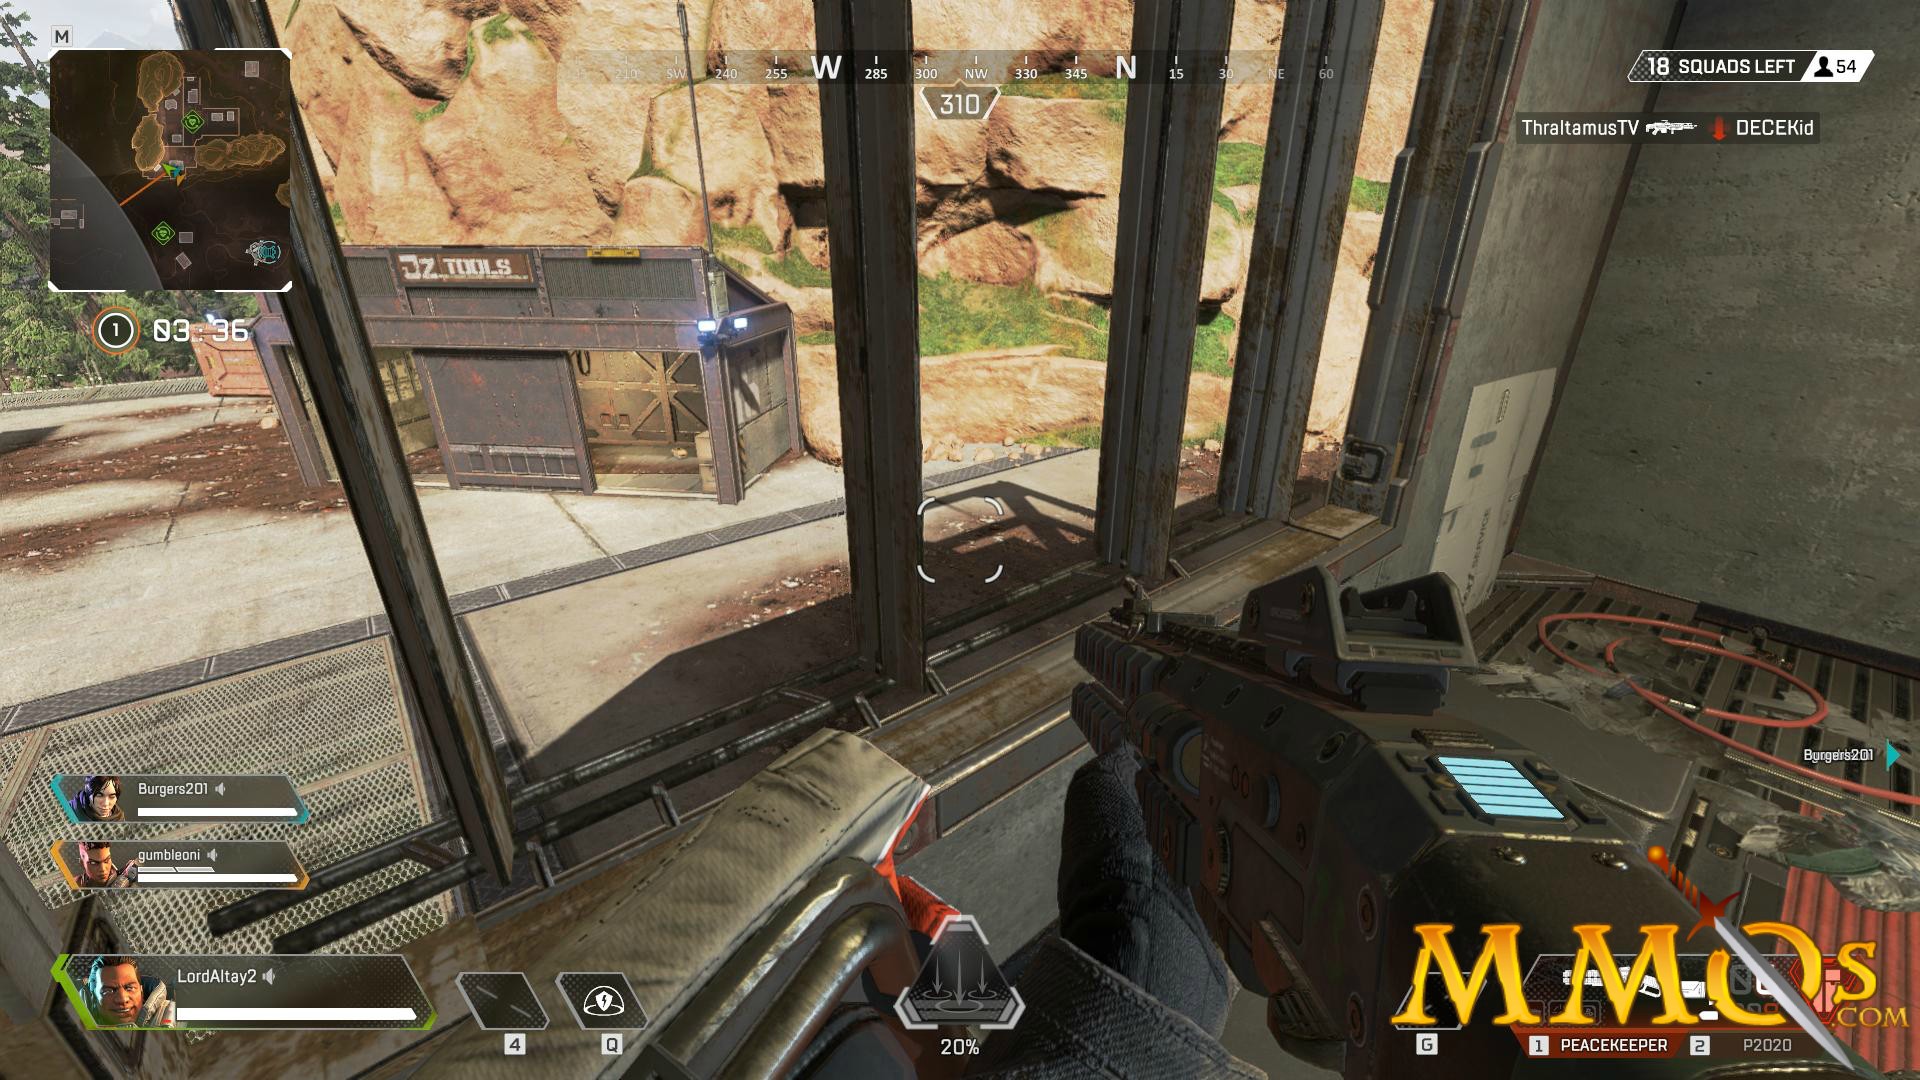 Screenshots of the two games. Upper panel shows Apex Legends